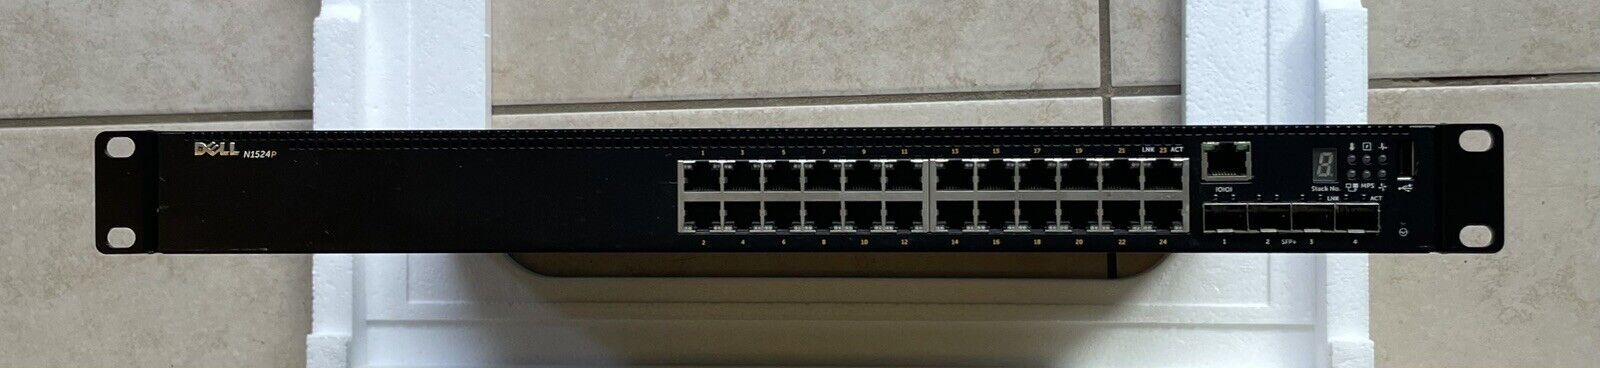 Dell EMC N1524P 24-Port 1GbE PoE+ Network Switch + Power Code + Tested